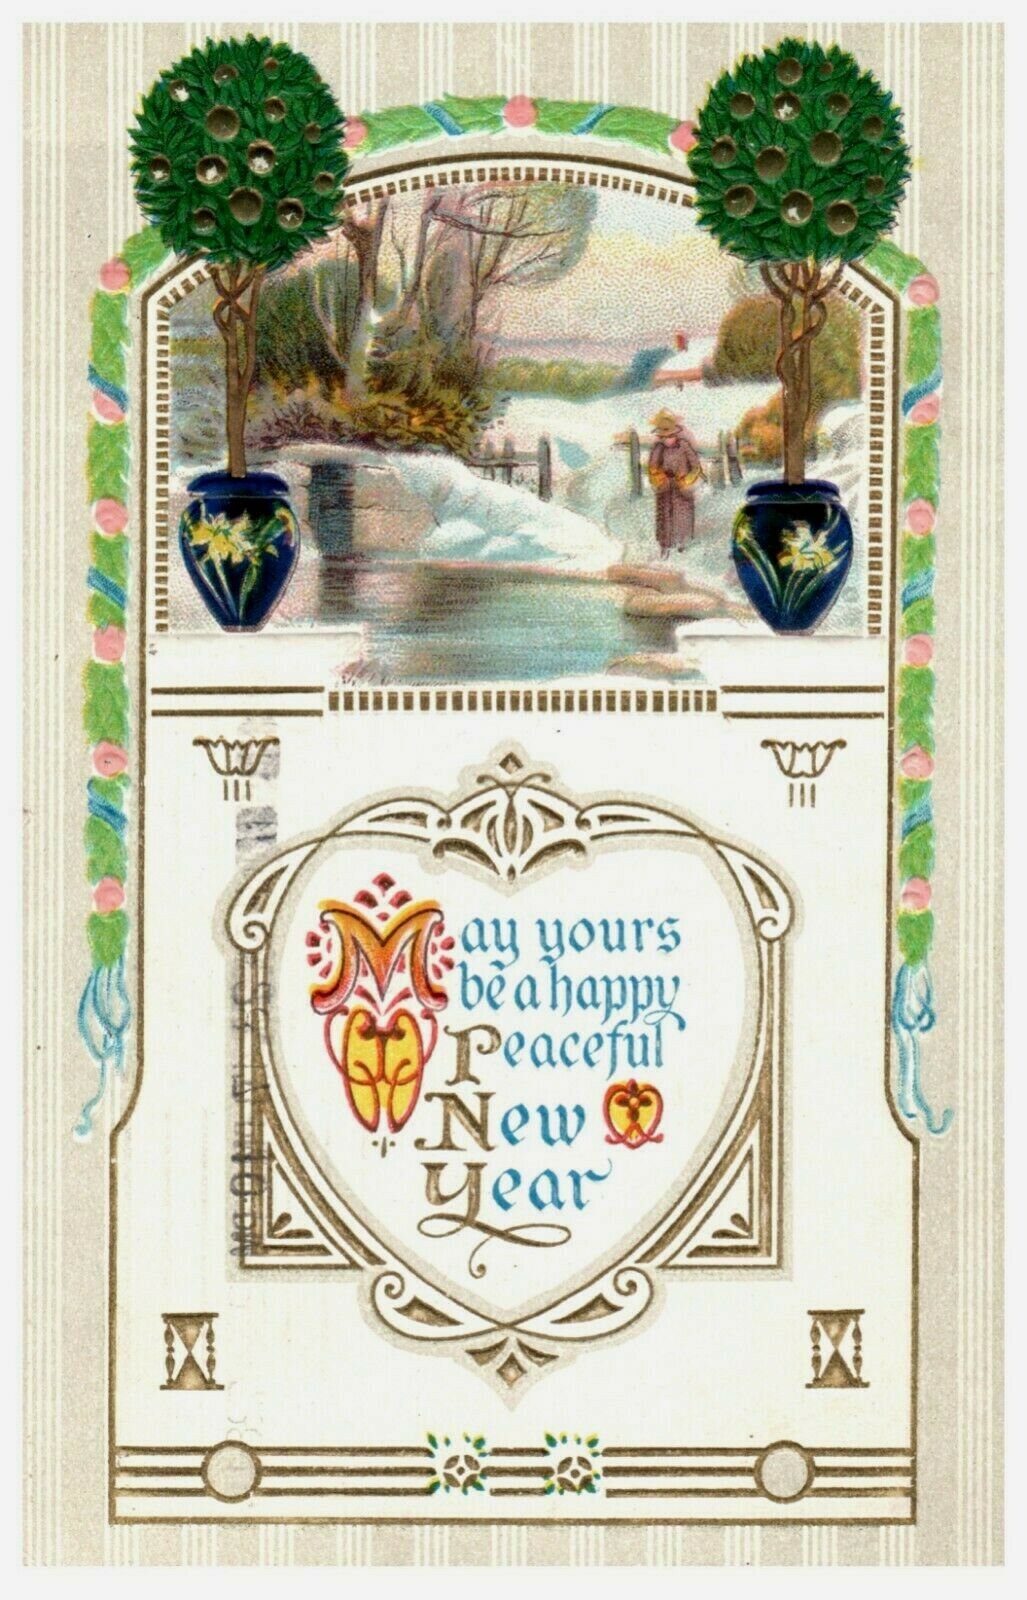 c.1911 May Yours be a Happy New Years Vintage Postcard Embossed